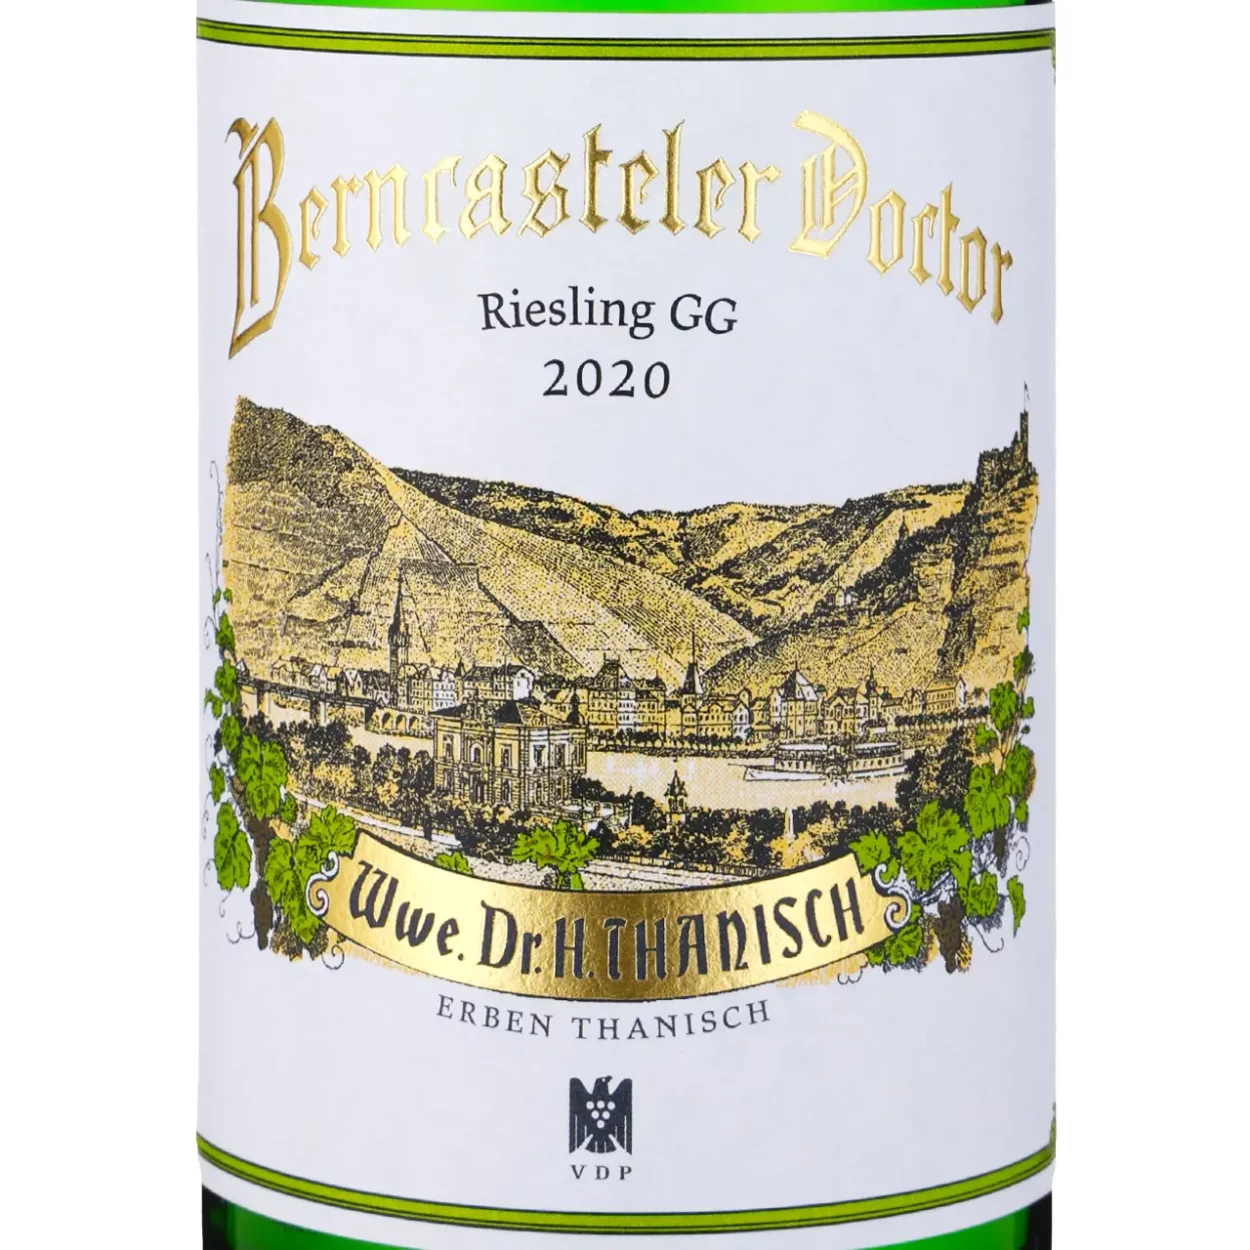 Wwe. Dr. H. Thanisch Doctor Riesling GG 2020